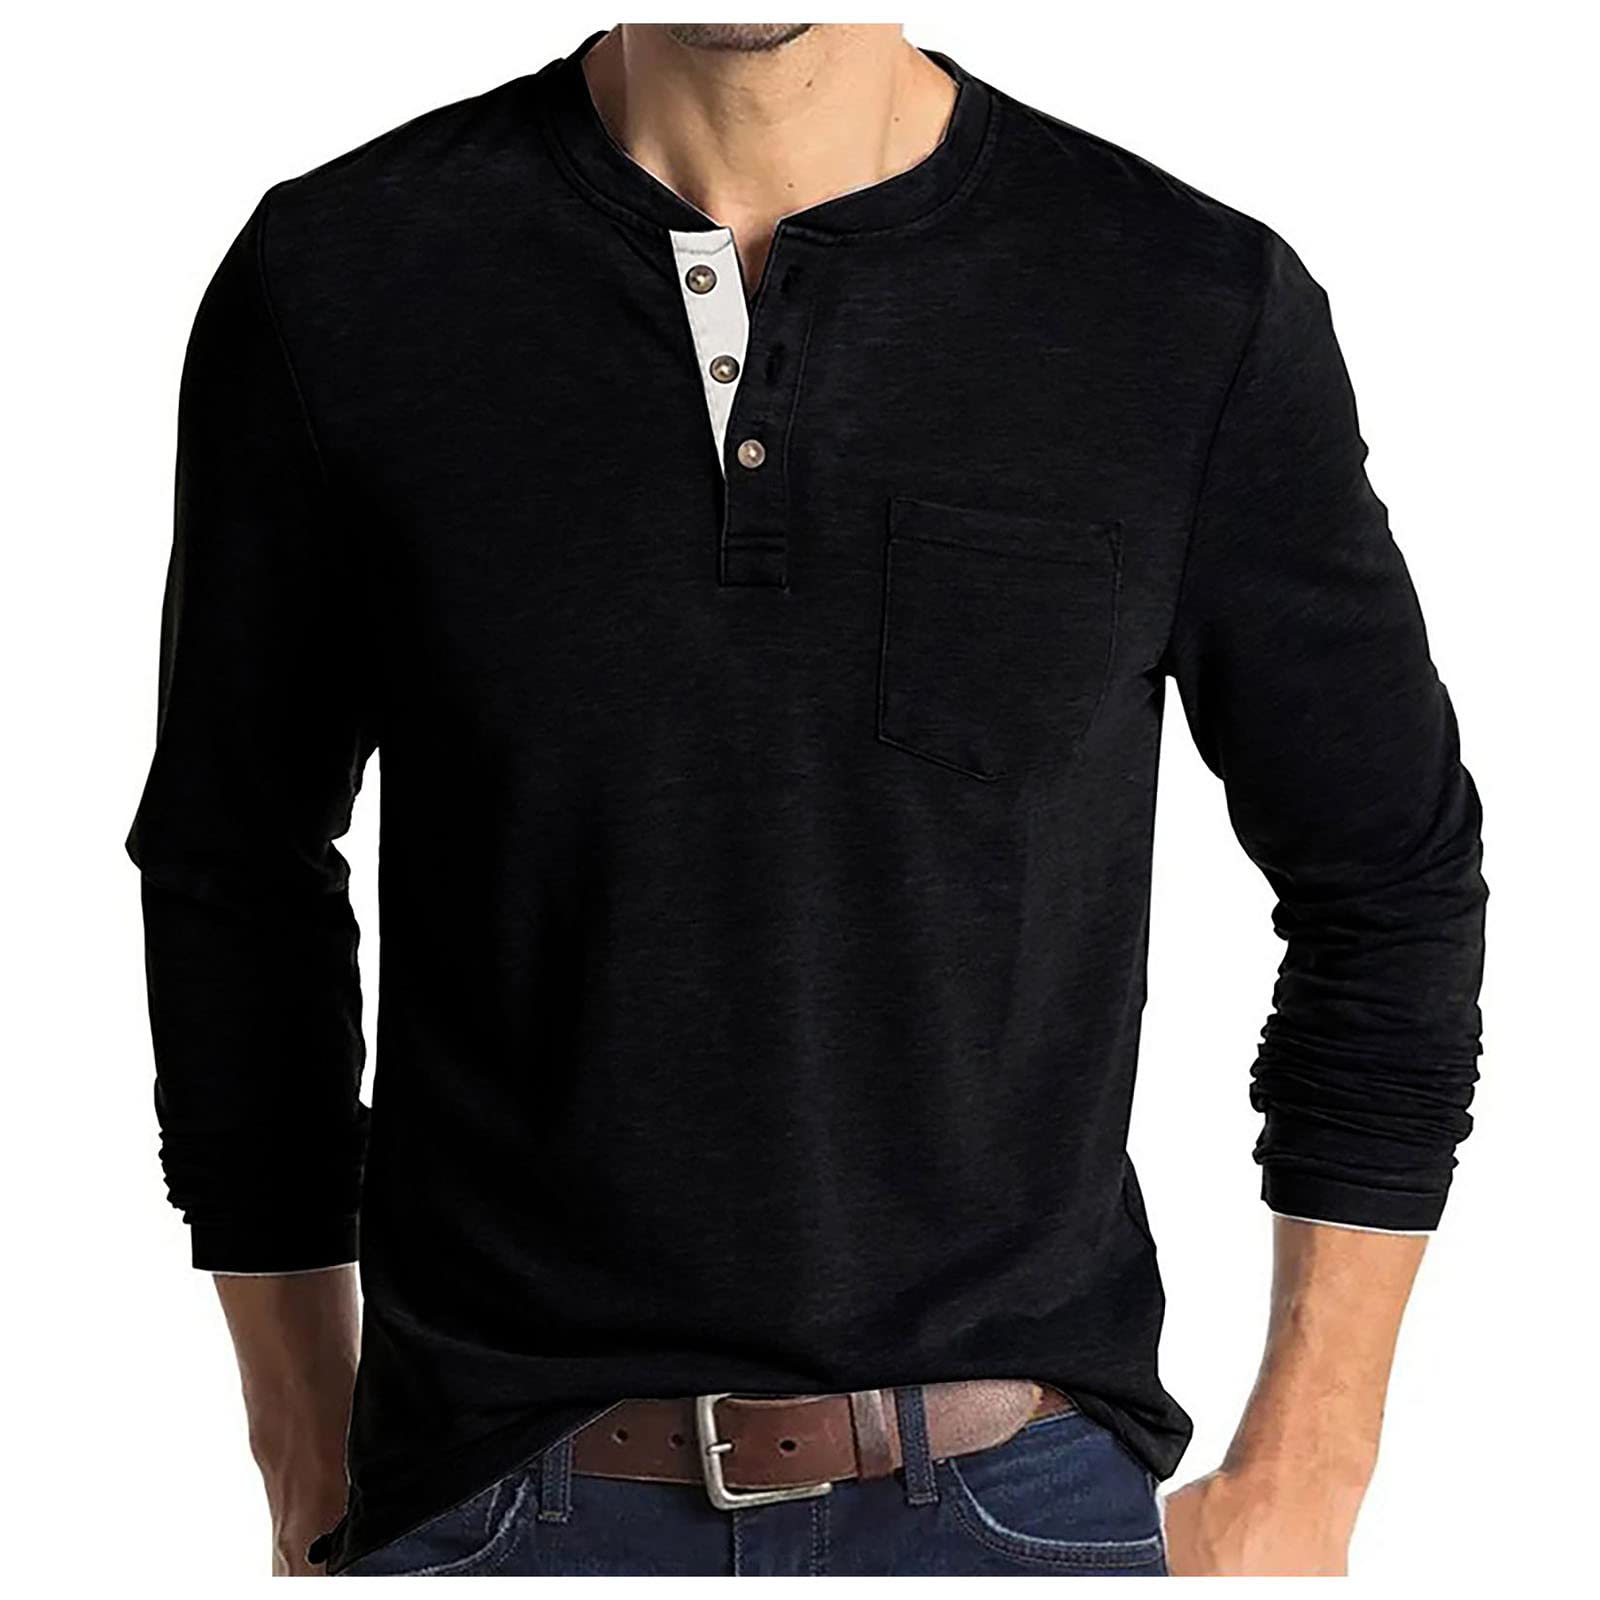 DuDubaby Western Shirts for Men Hedging Print Round Neck Loose Casual Long Sleeves Top Cotton T Shirts for Men